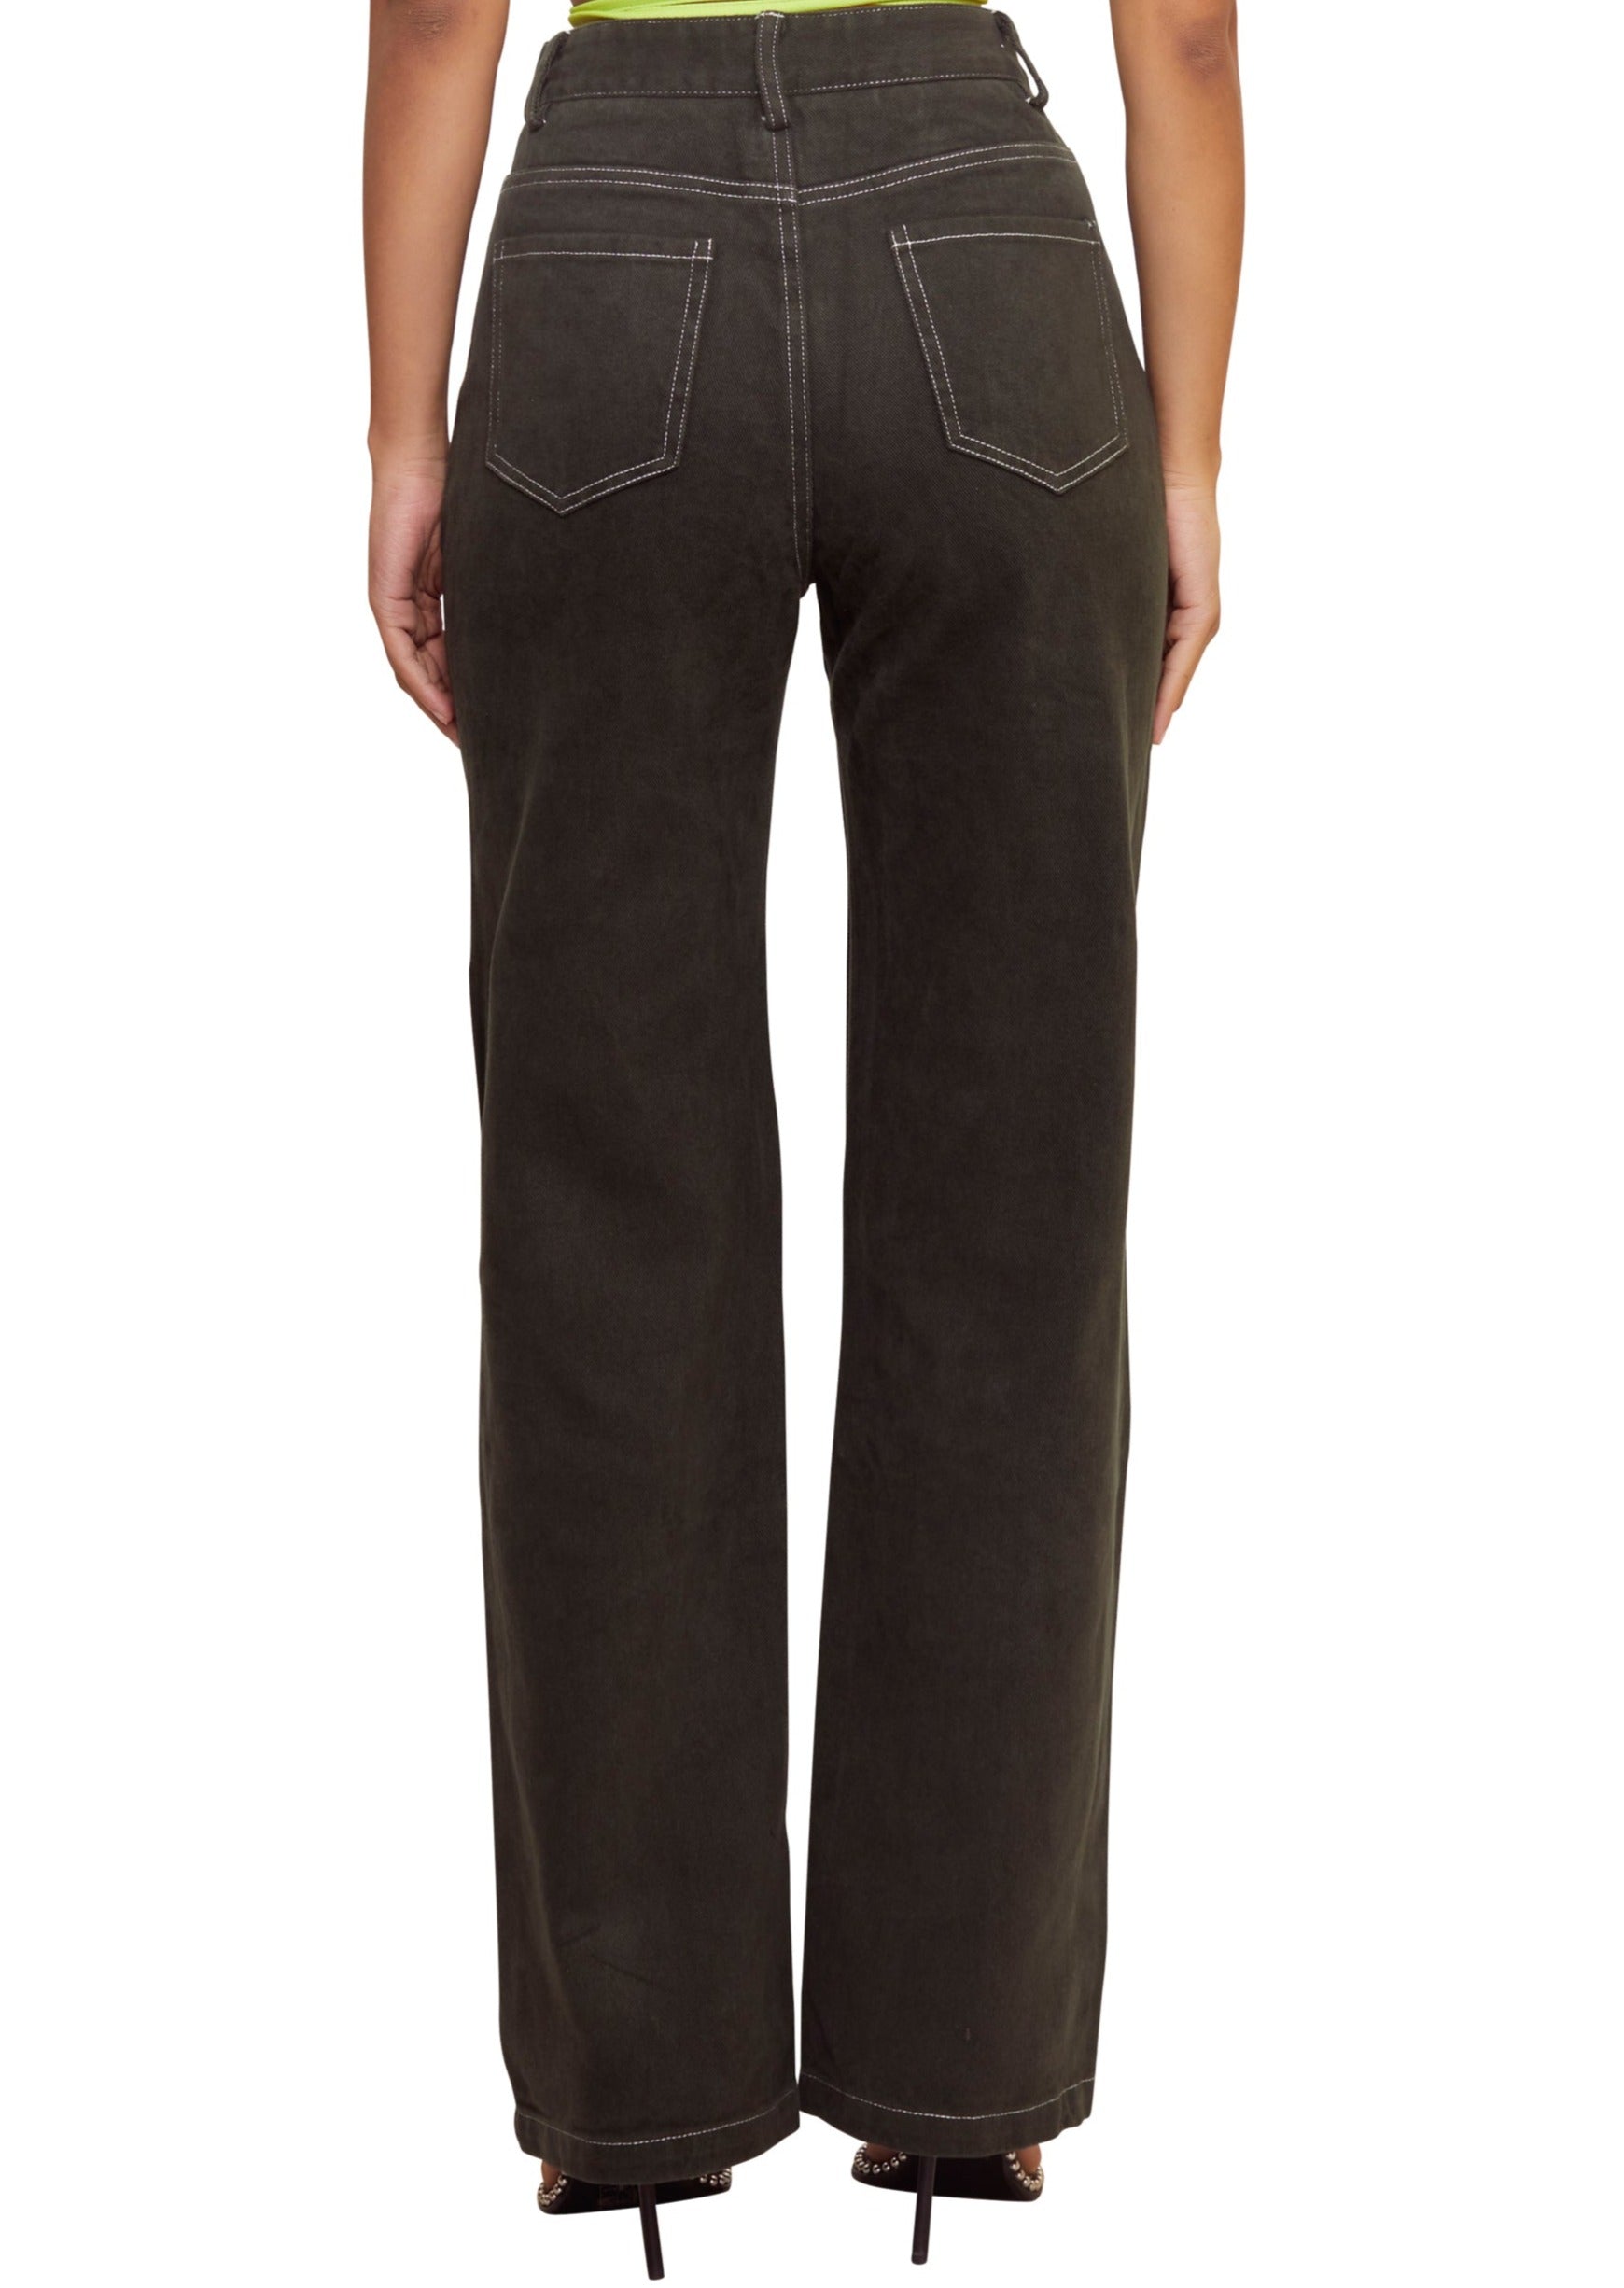 Black non-stretchy straight jeans from the brand The Kript